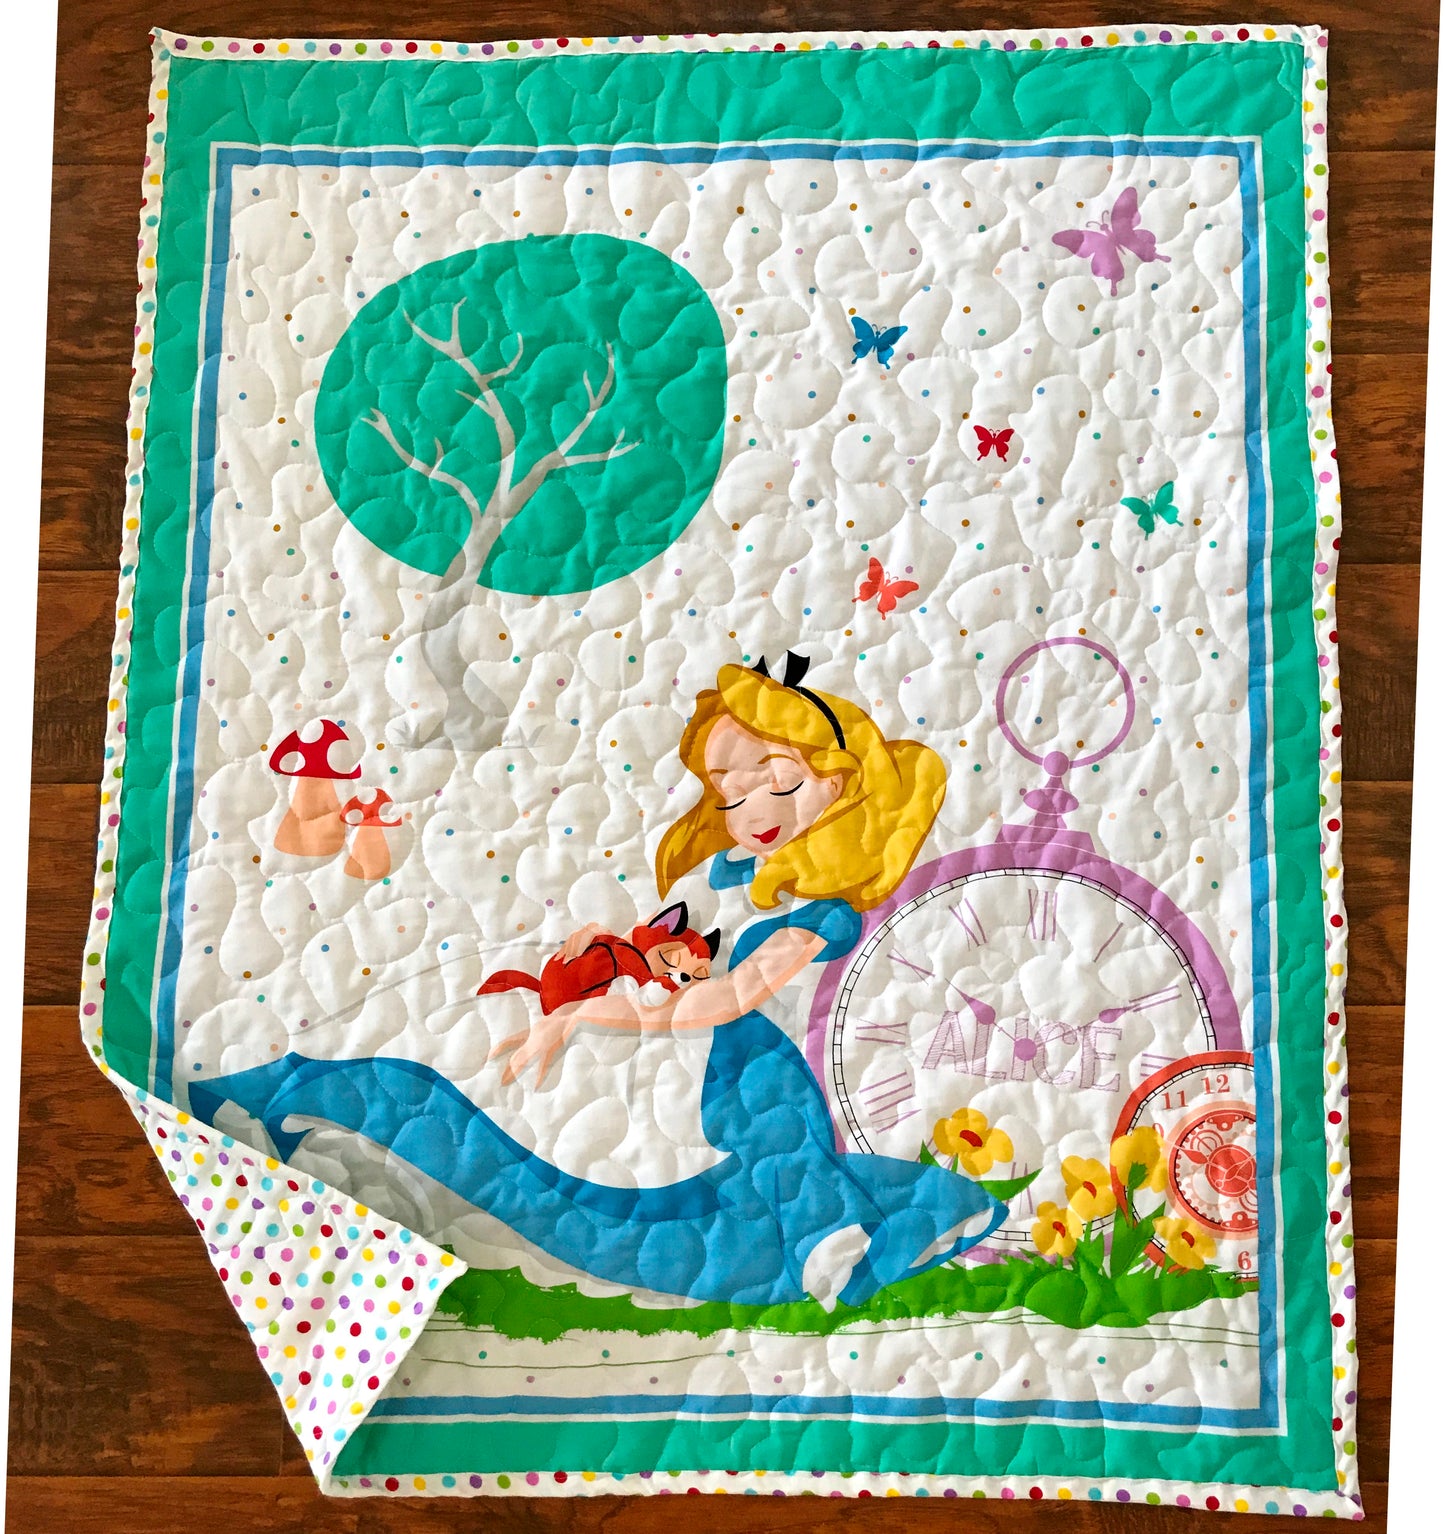 ALICE IN WONDERLAND CAT NAPPING Inspired Quilted Blanket